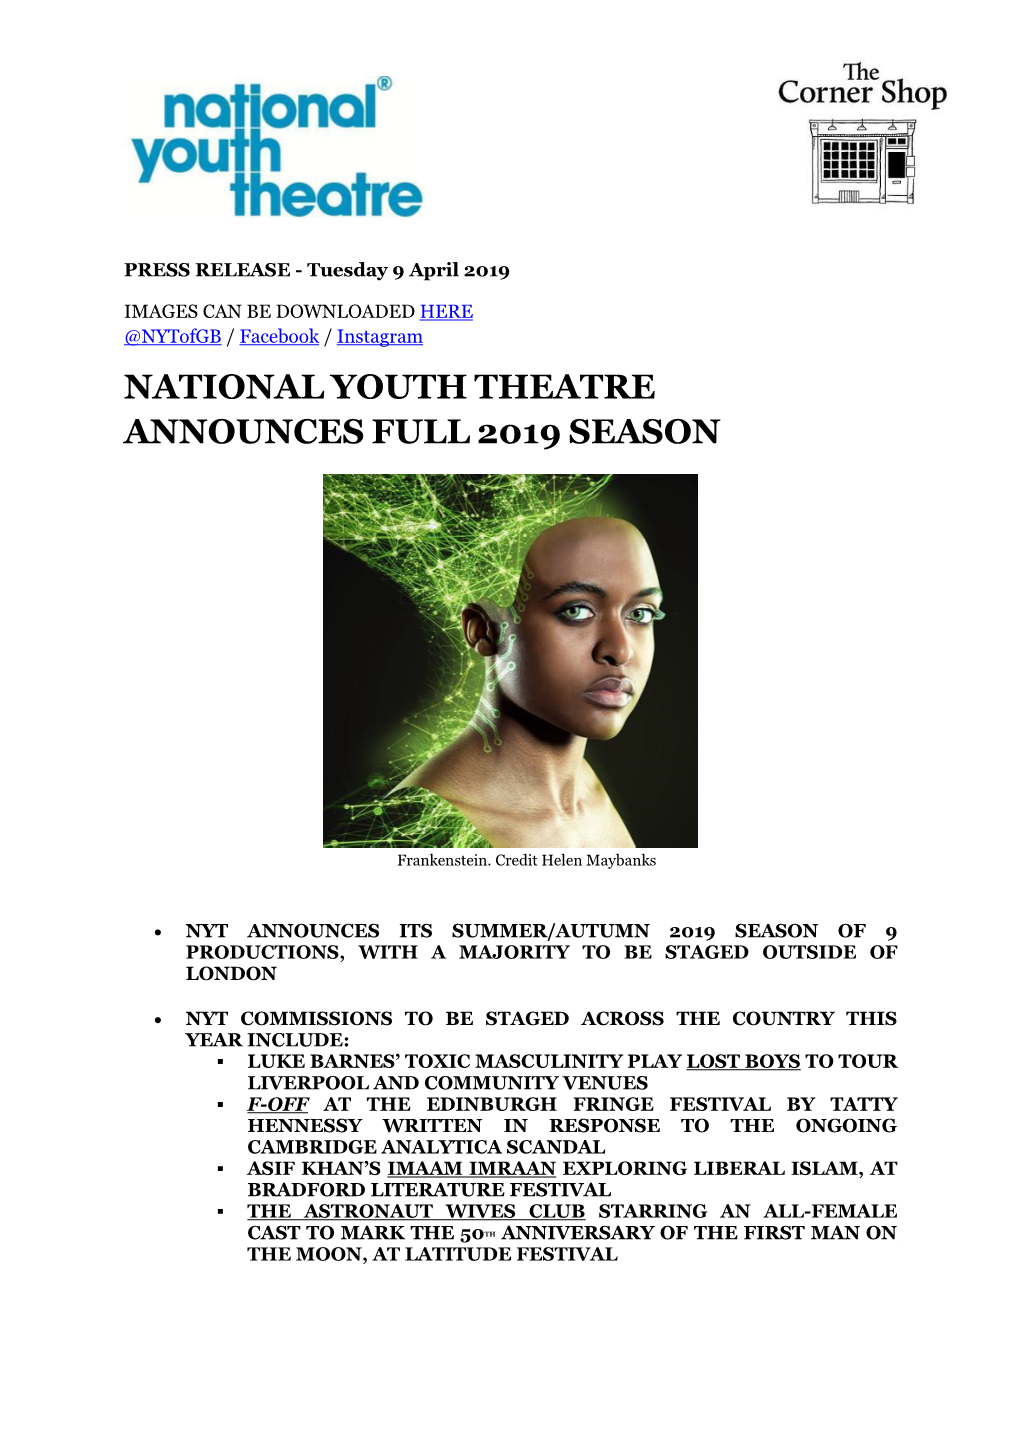 National Youth Theatre Announces Full 2019 Season